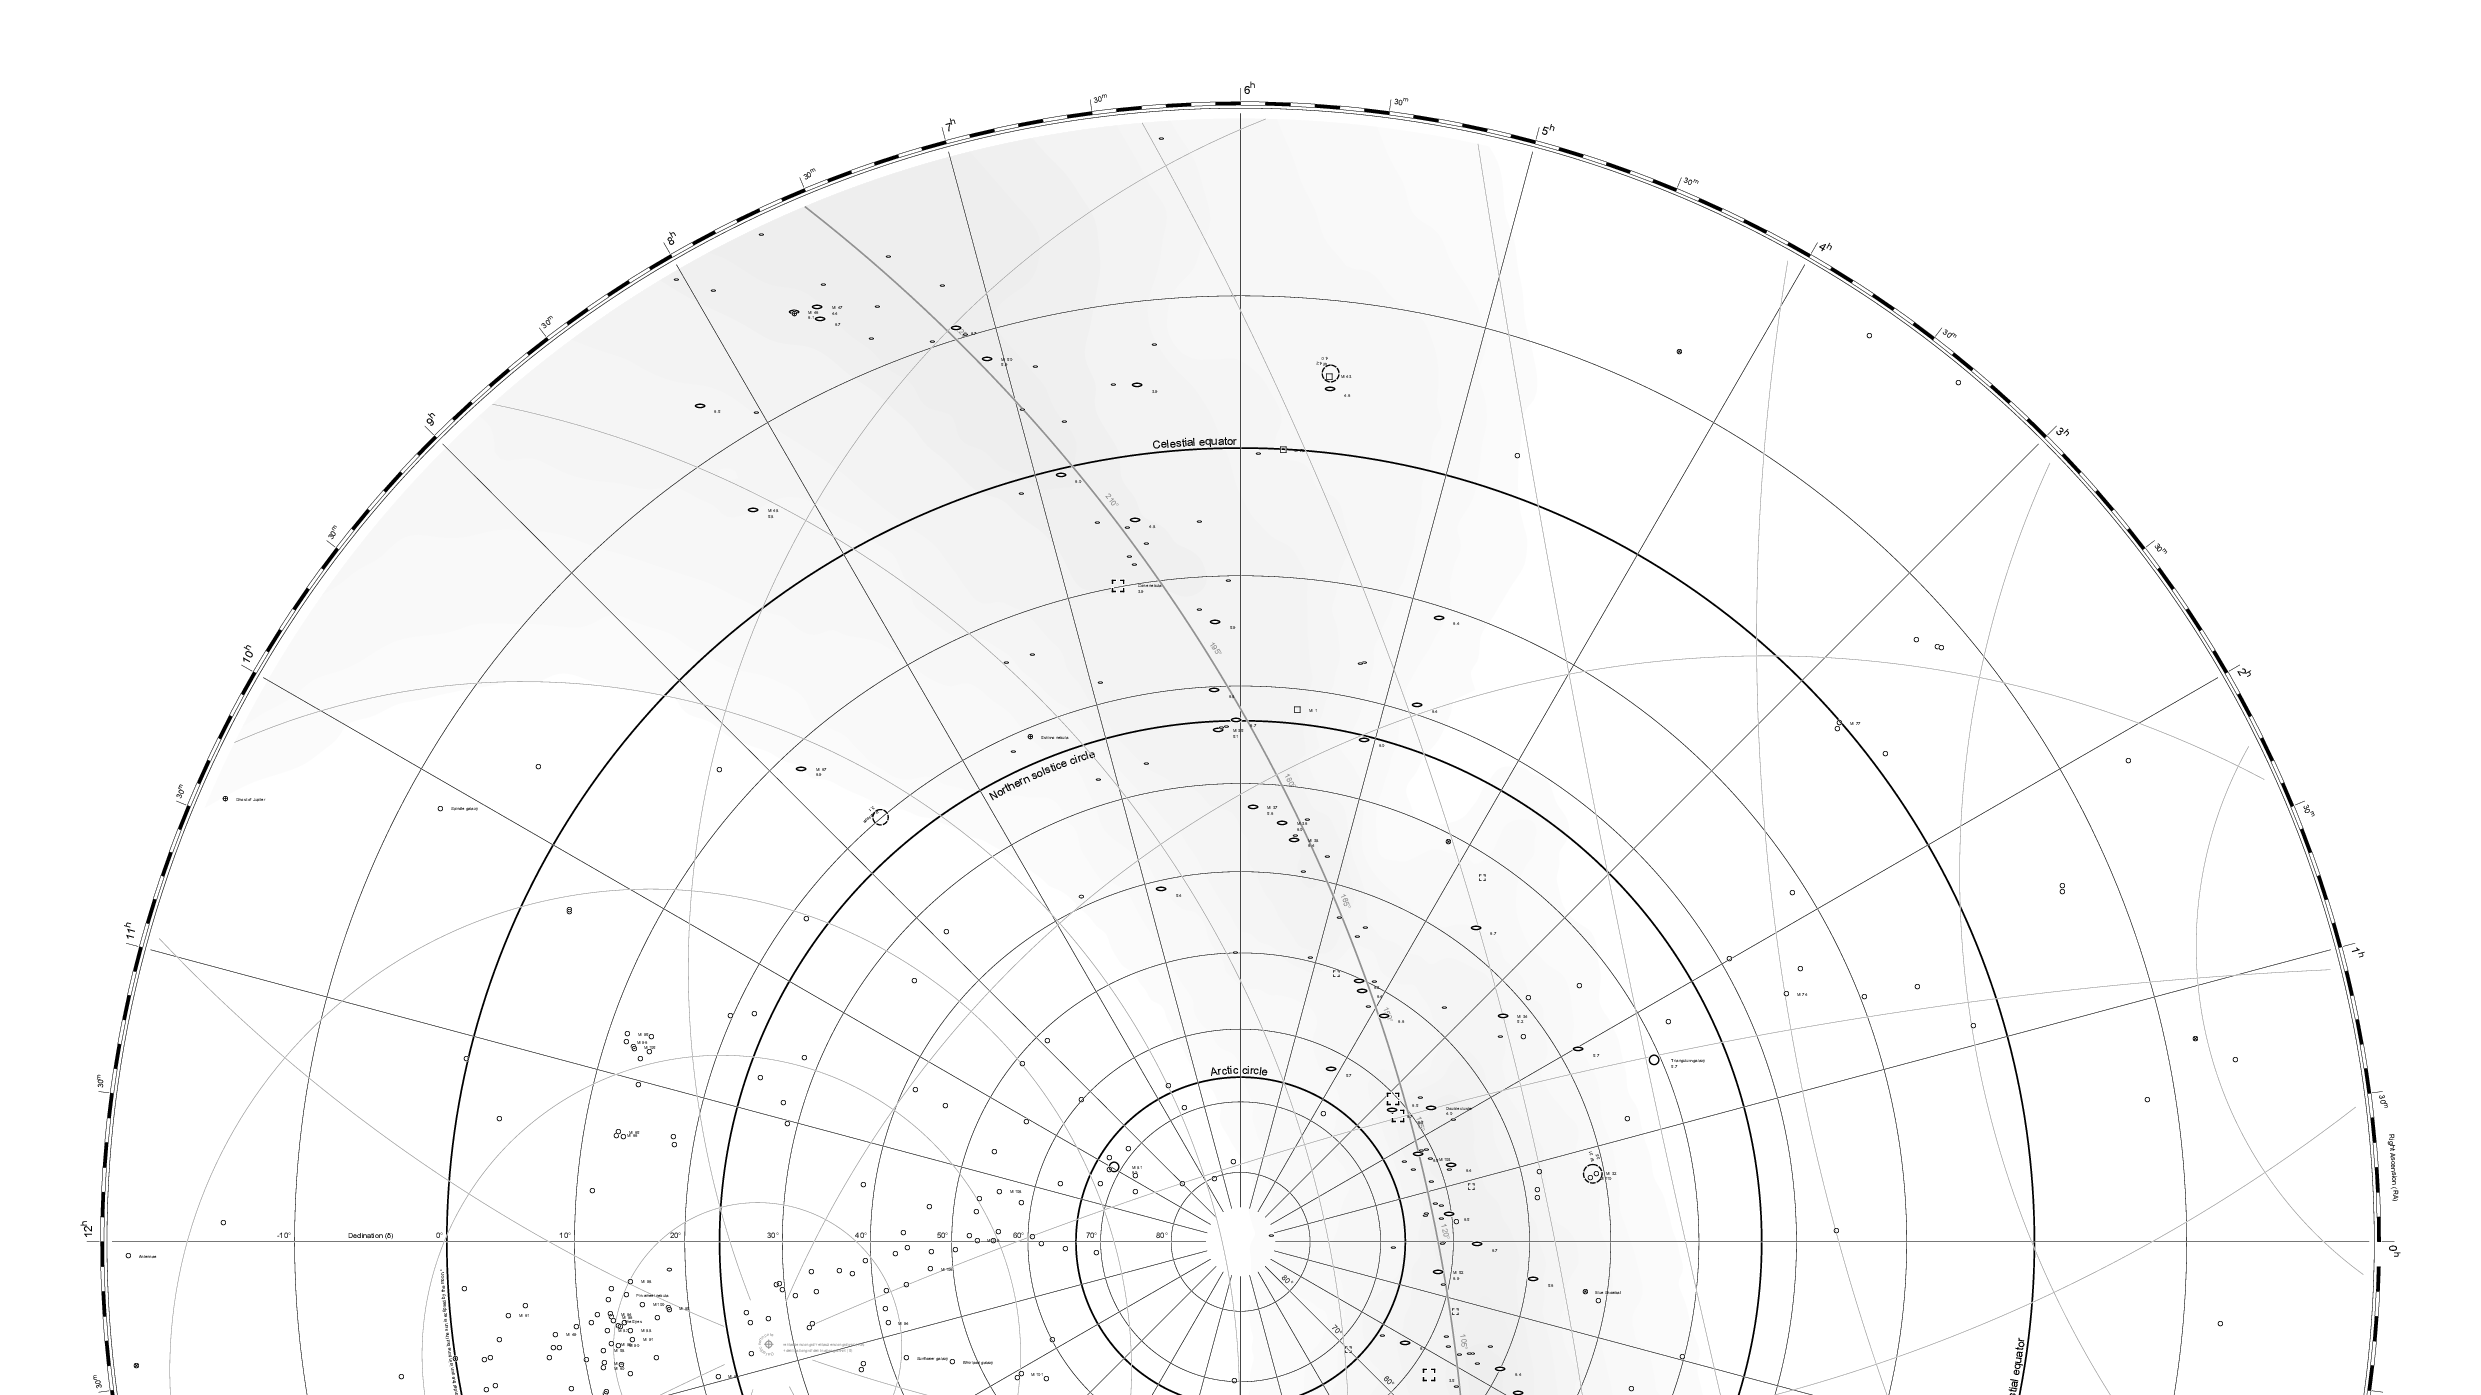 Gallery item of a scientific custom star chart with various grids, stars up to a certain magnitude and depicting each with a star type specific symbol taken from Charta Caeli's font.